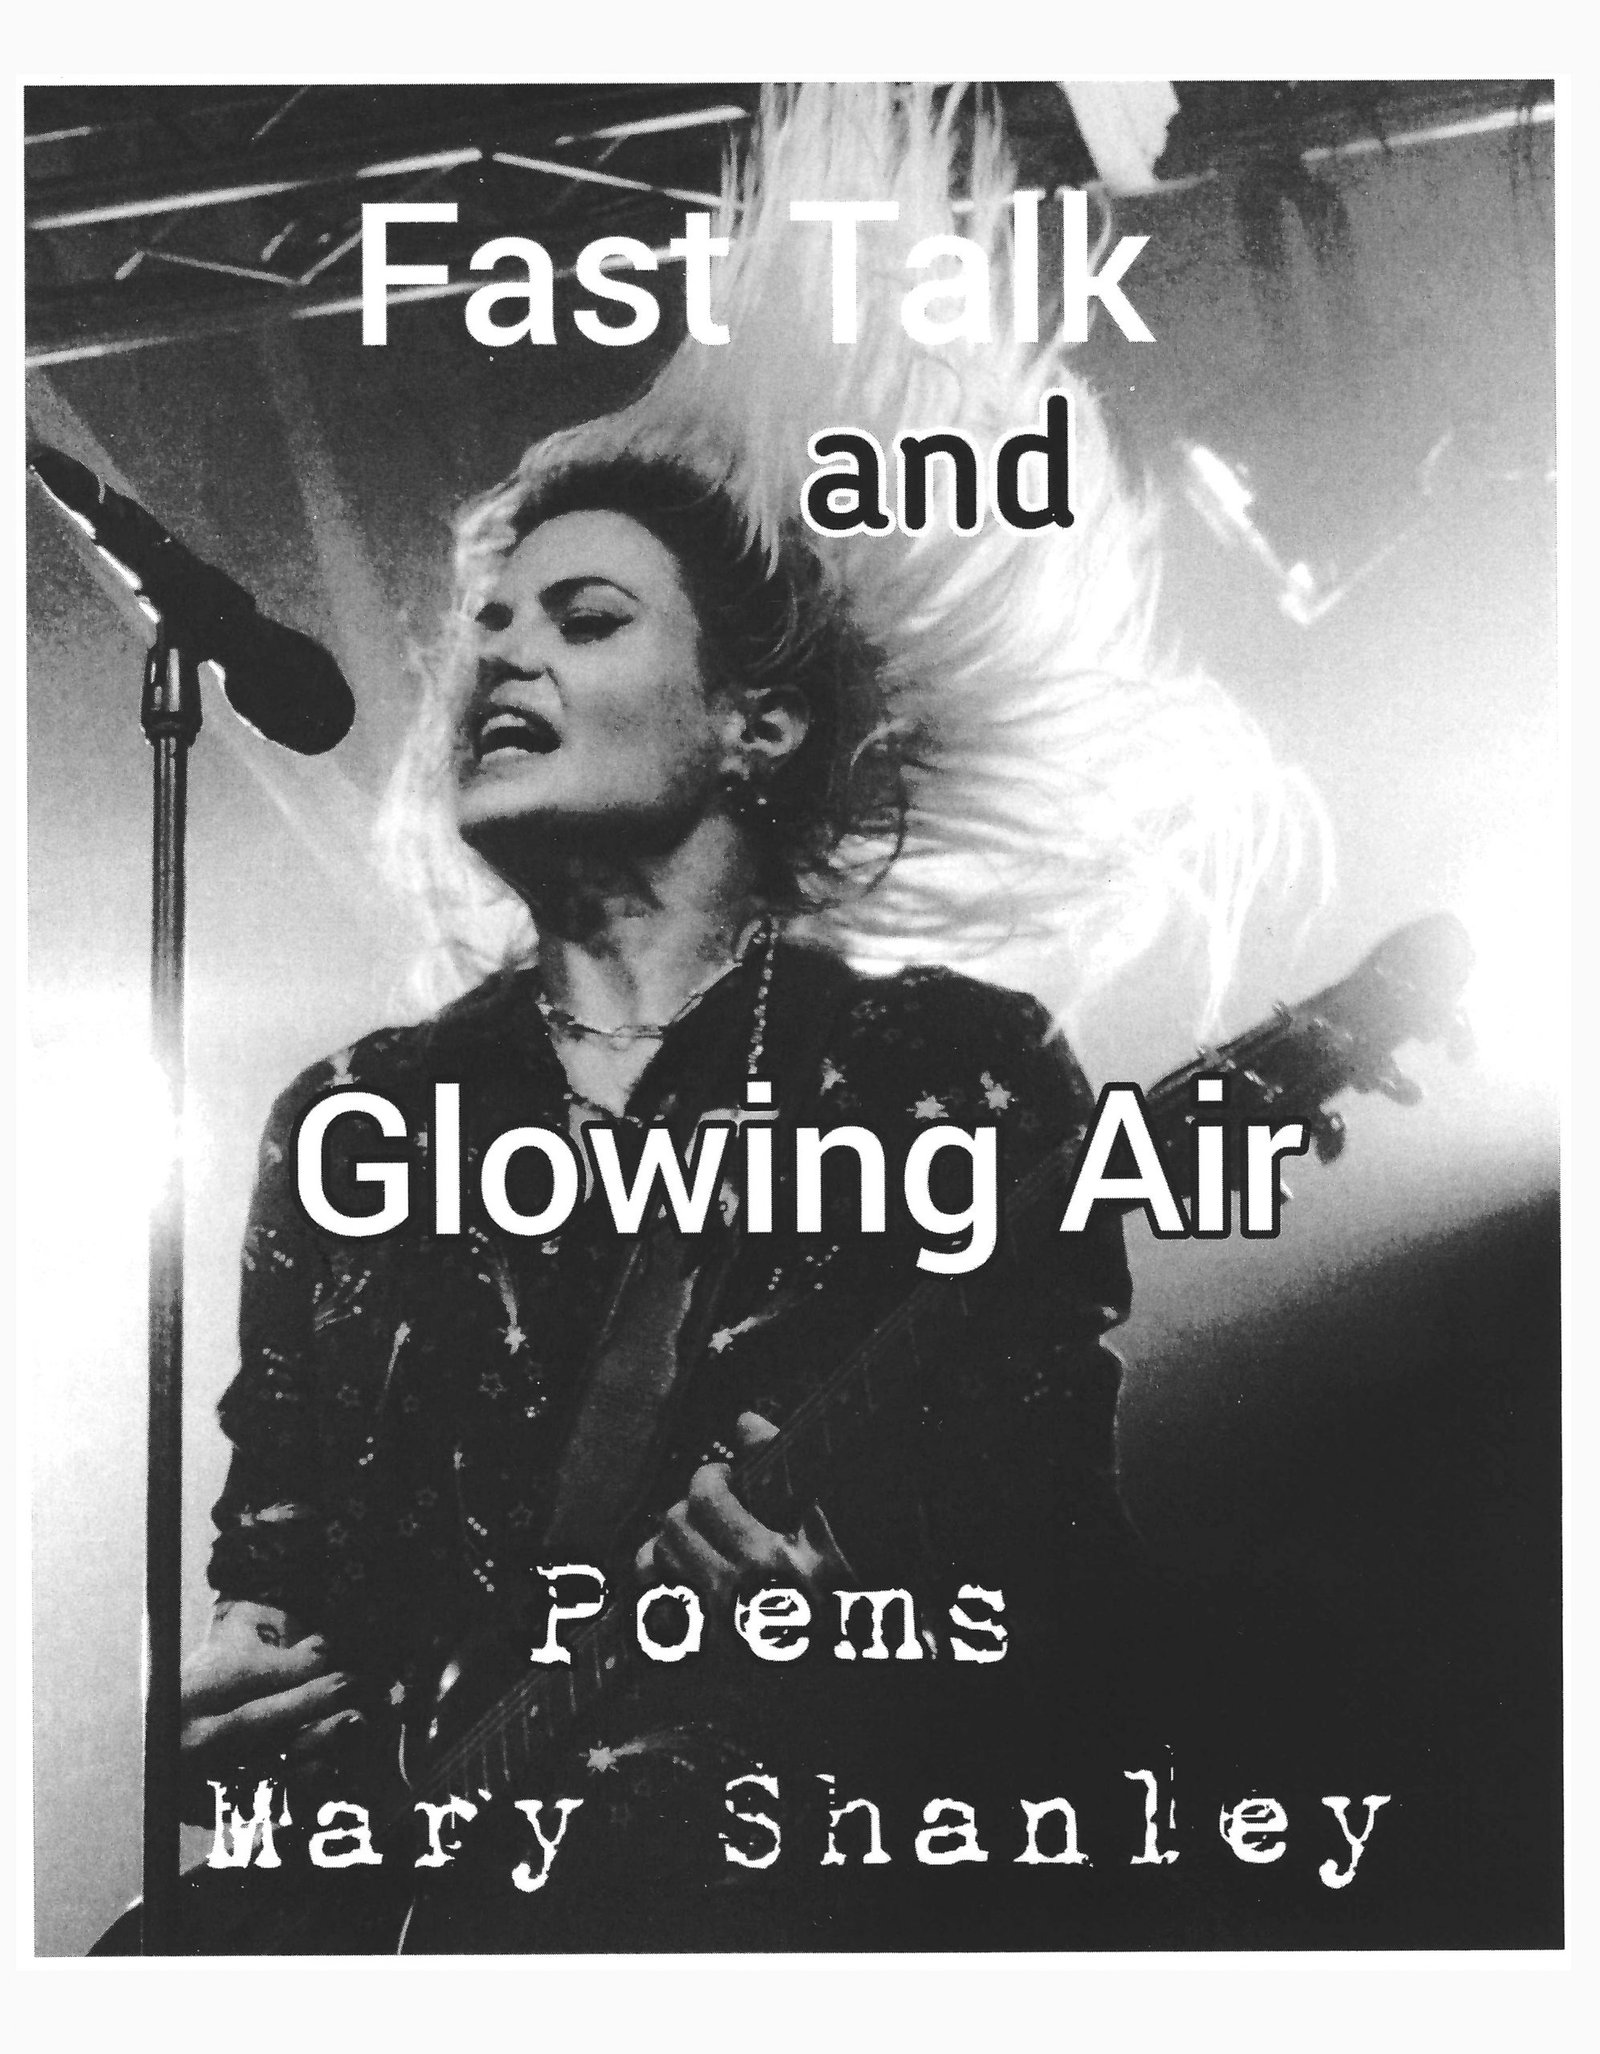 Fast Talk and Glowing Air